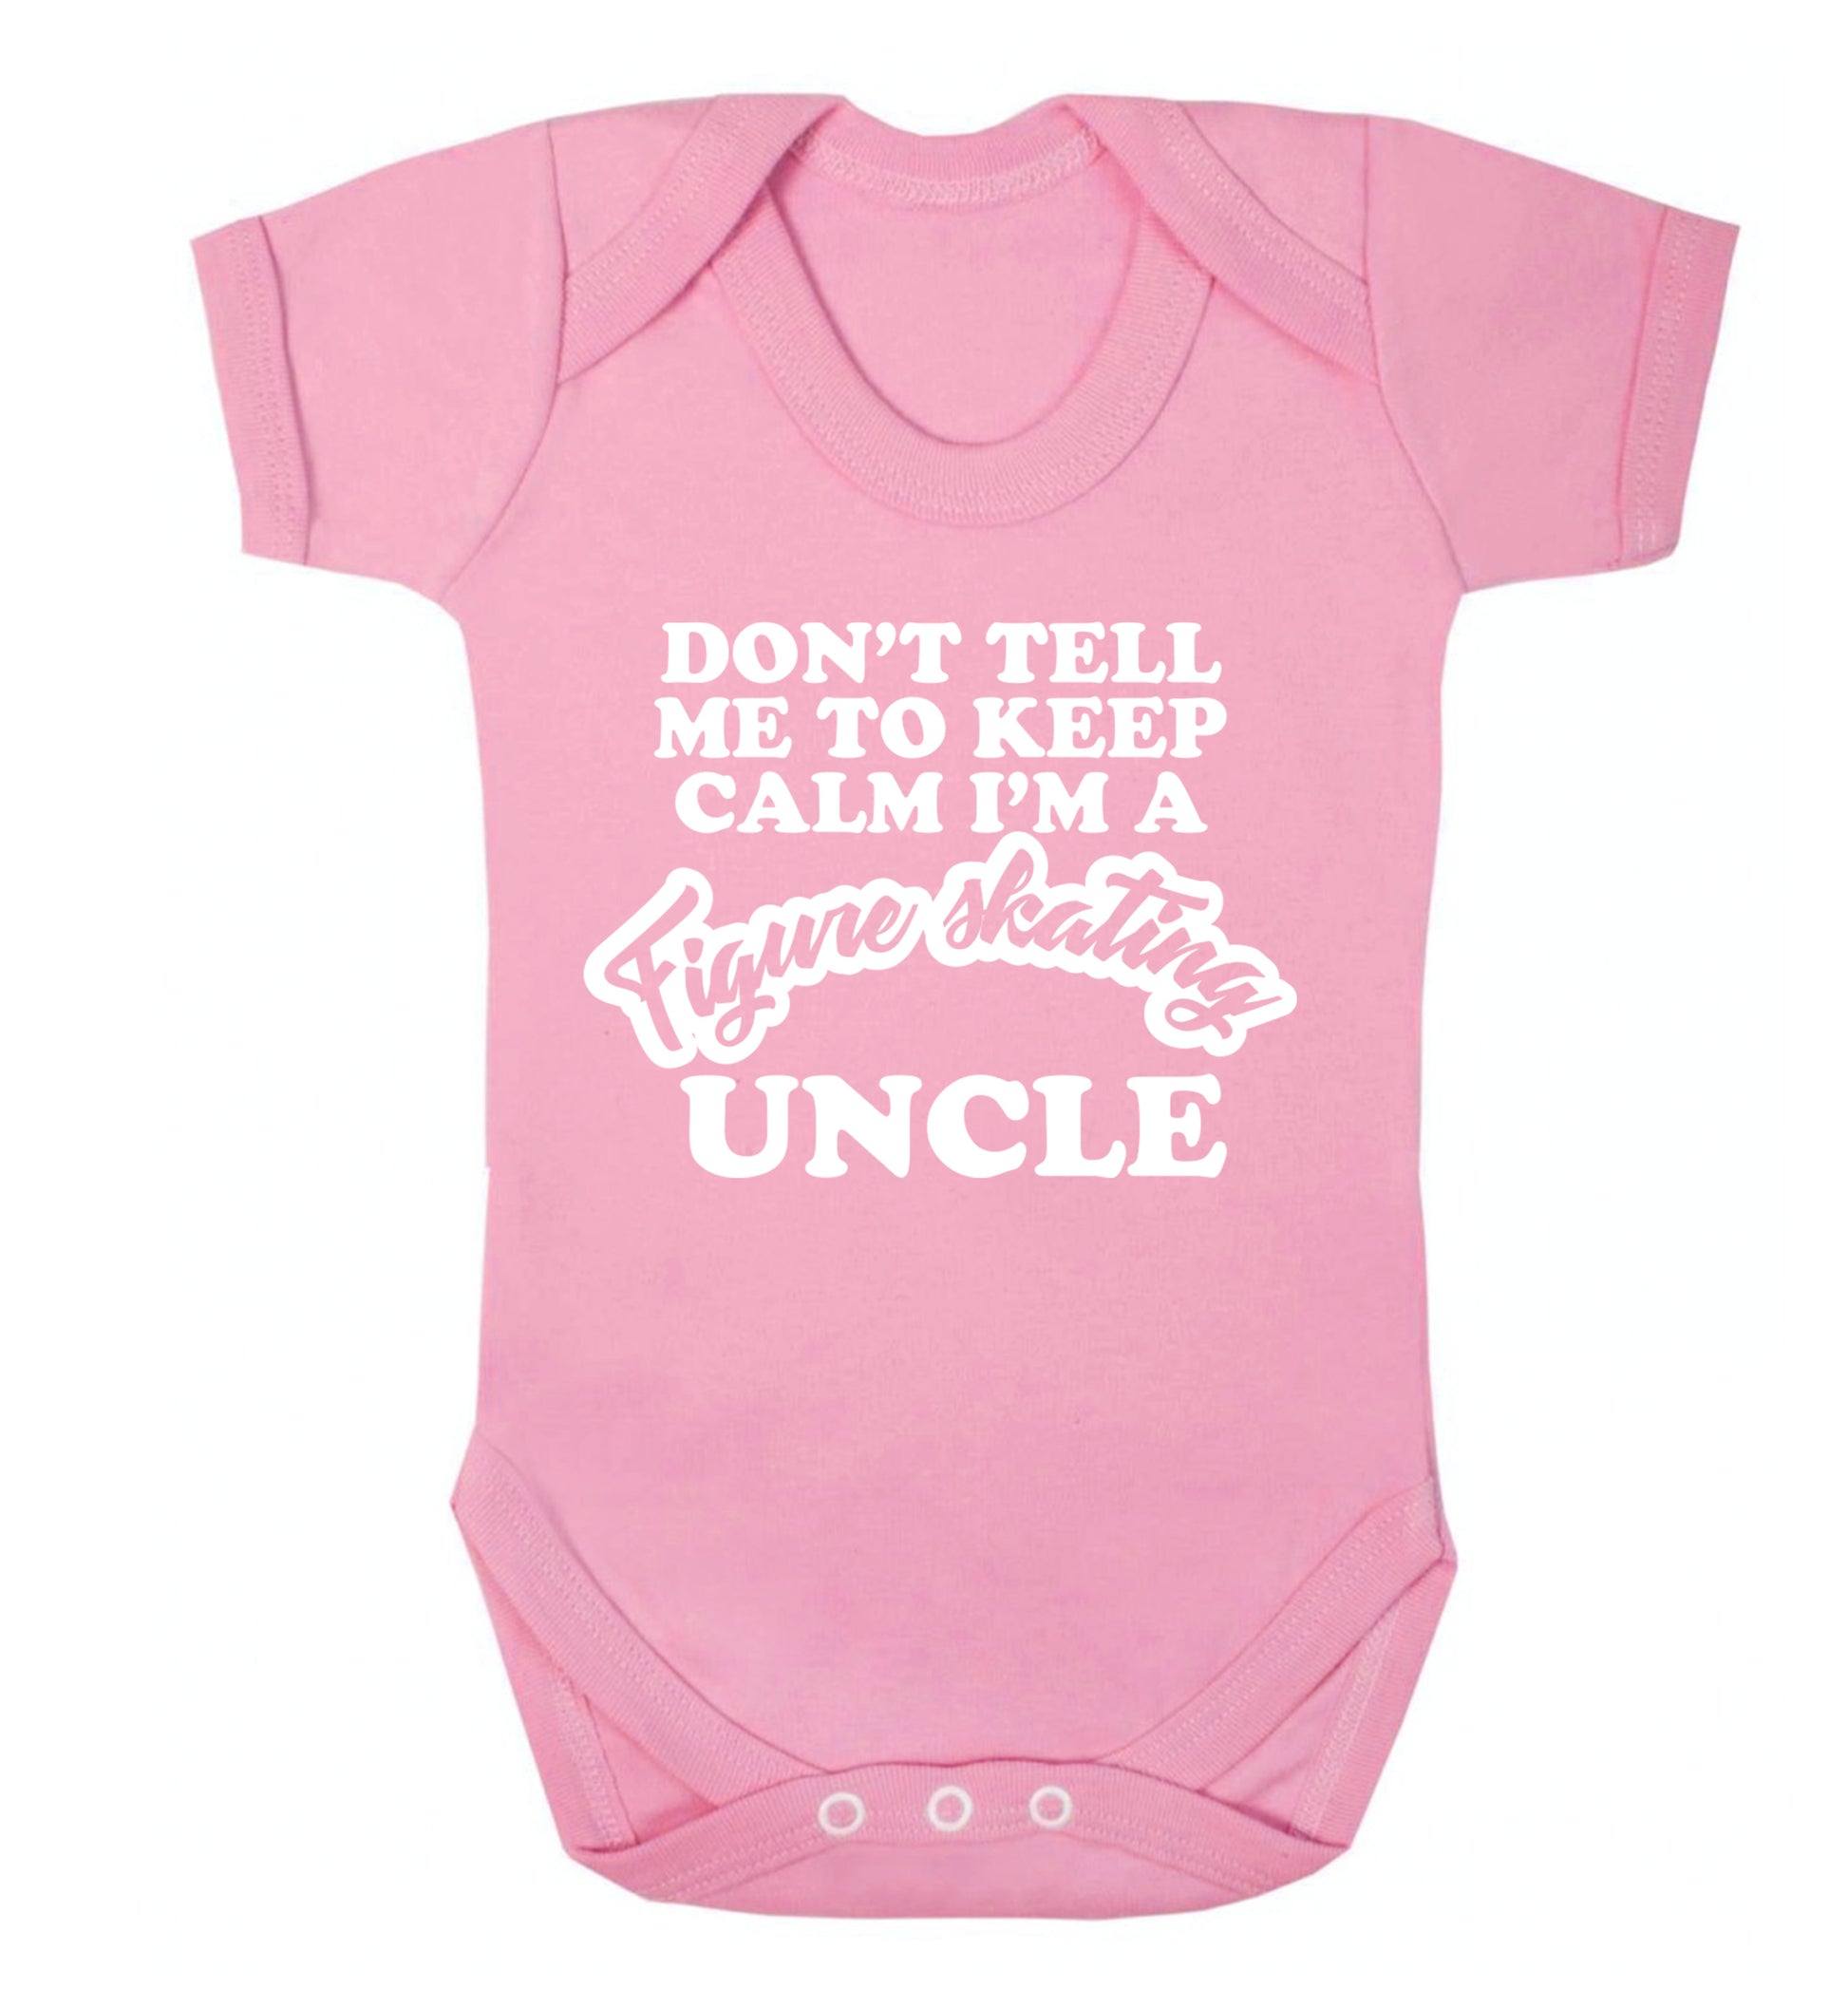 Don't tell me to keep calm I'm a figure skating uncle Baby Vest pale pink 18-24 months